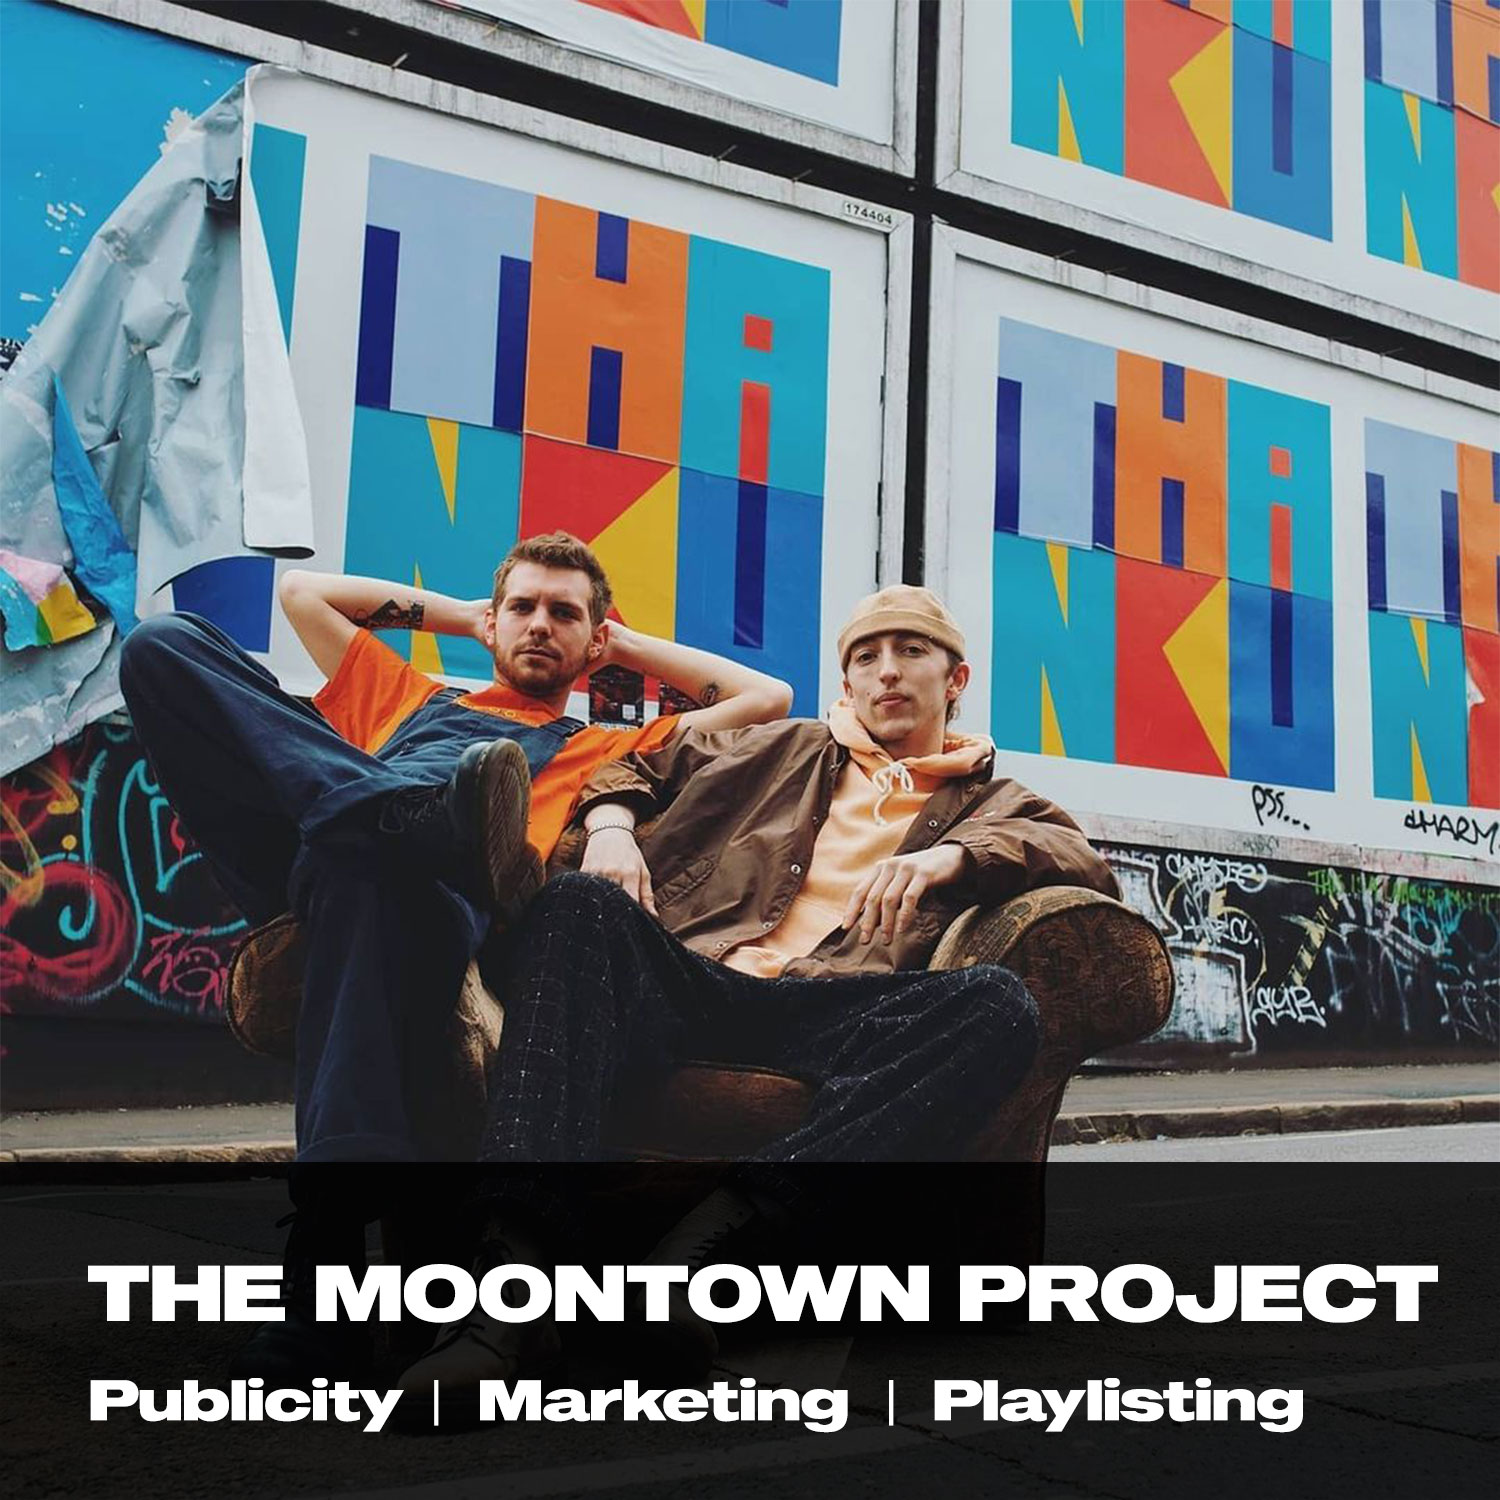 THE-MOONTOWN-PROJECT-WEB